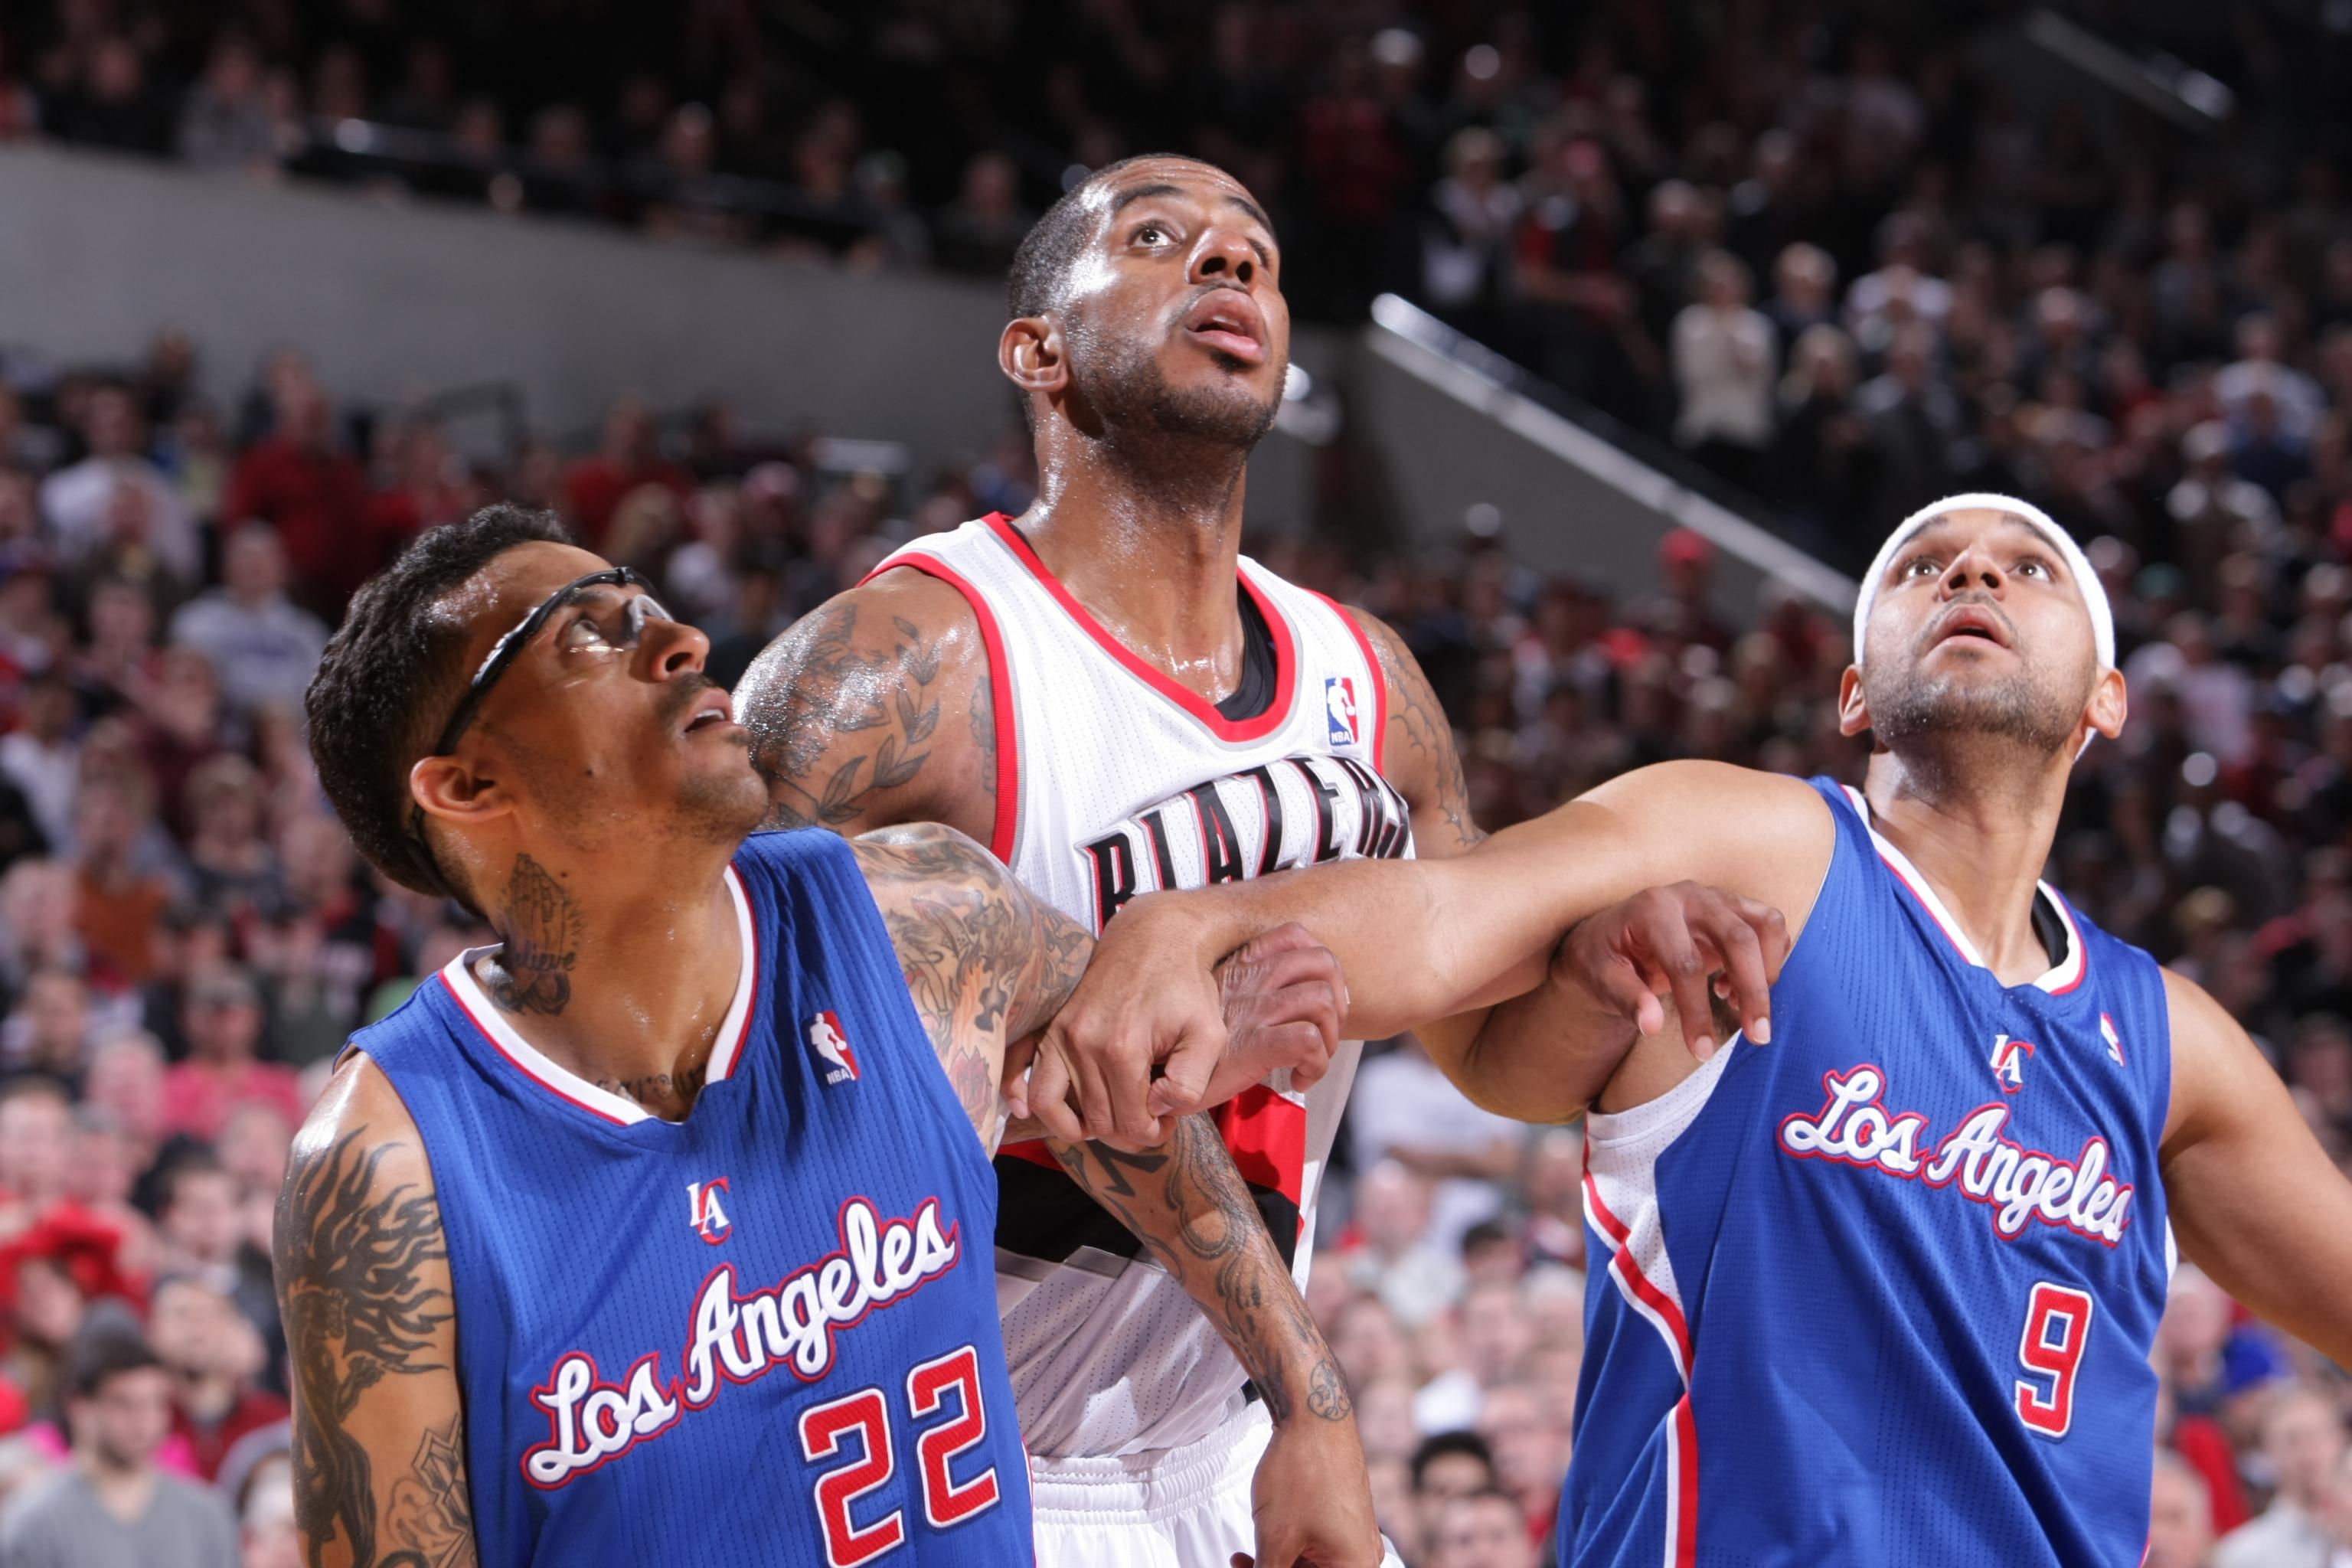 LA Clippers on X: Better Together. The Clippers have the top